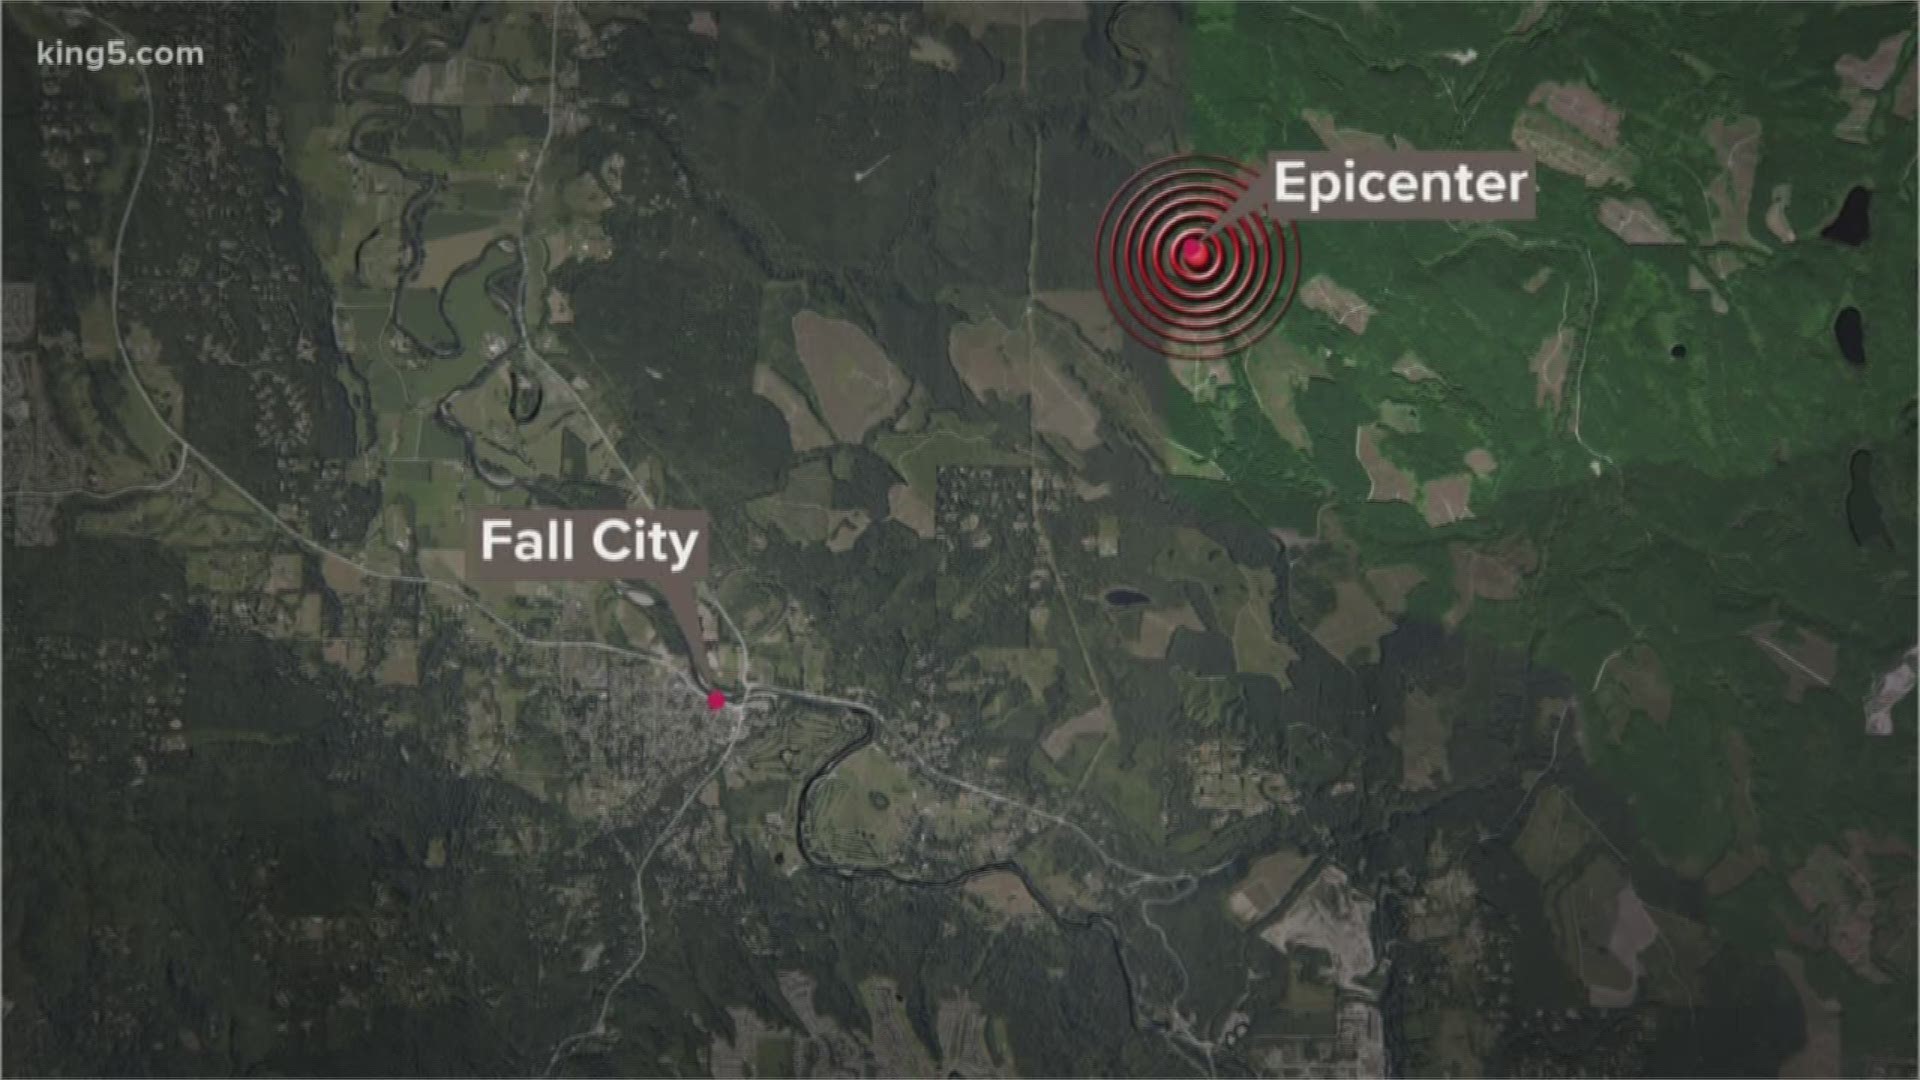 A magnitude 3 earthquake was recorded about 3.6 miles from Fall City on Dec. 19, 2019 around 4:40 a.m., according to the U.S. Geological Survey.